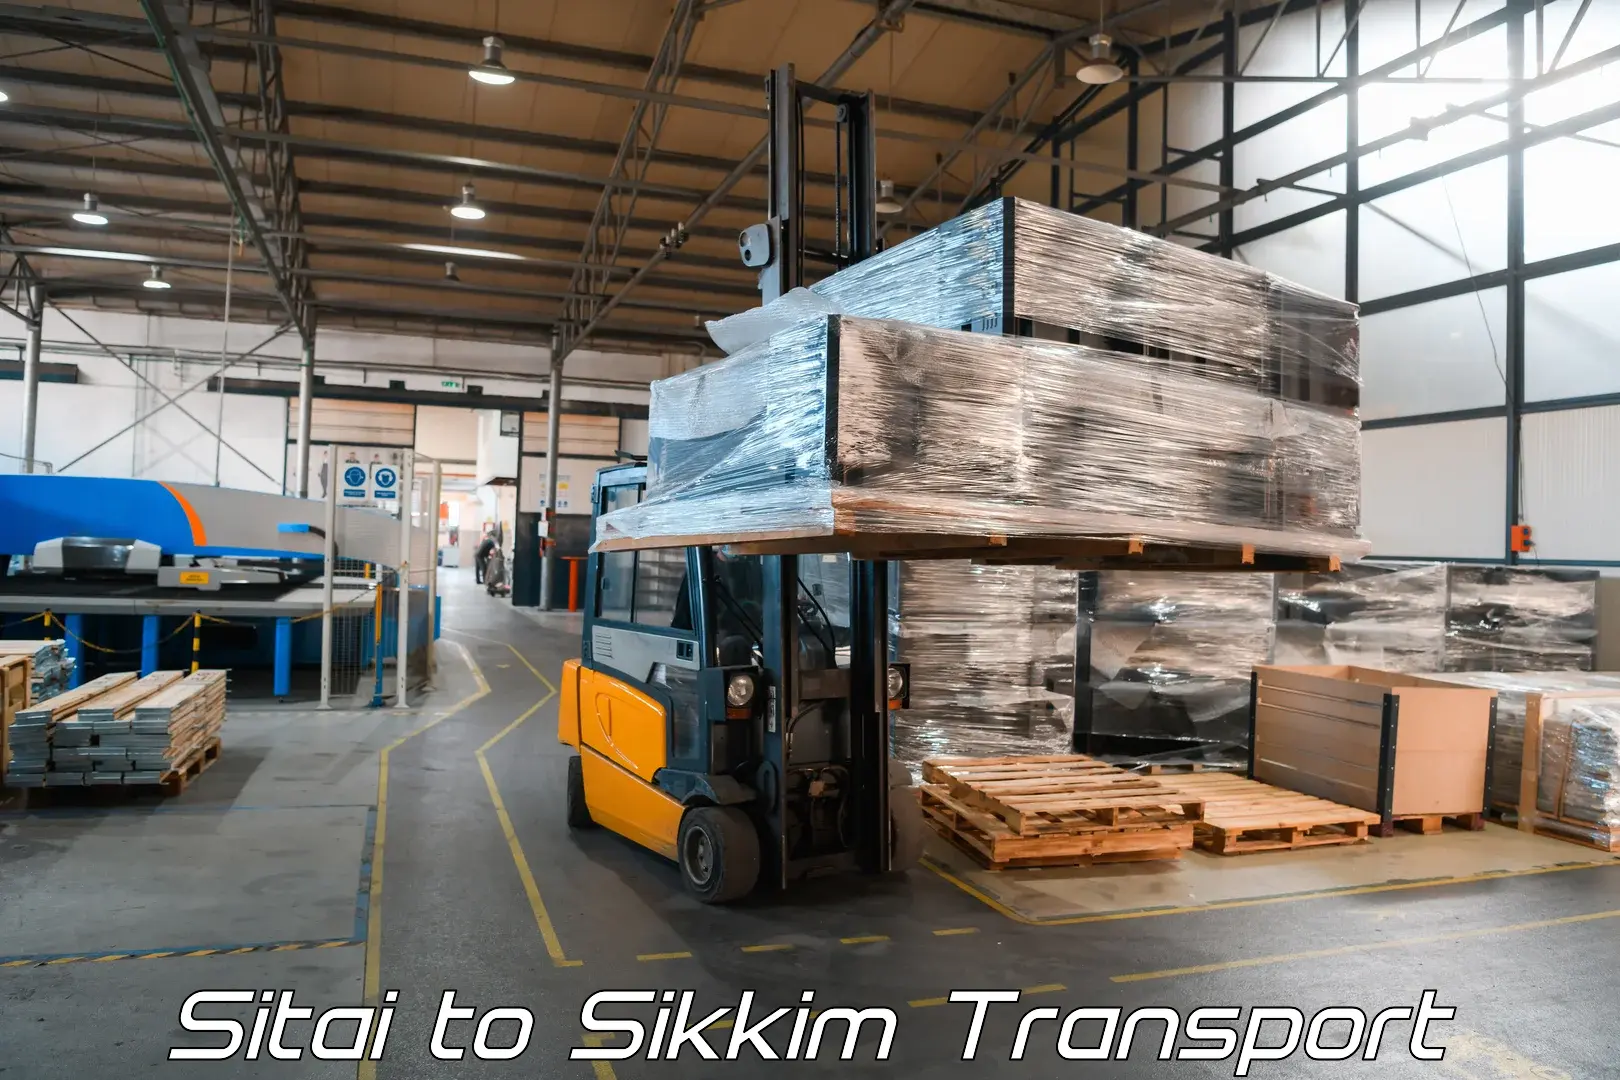 Commercial transport service Sitai to Sikkim